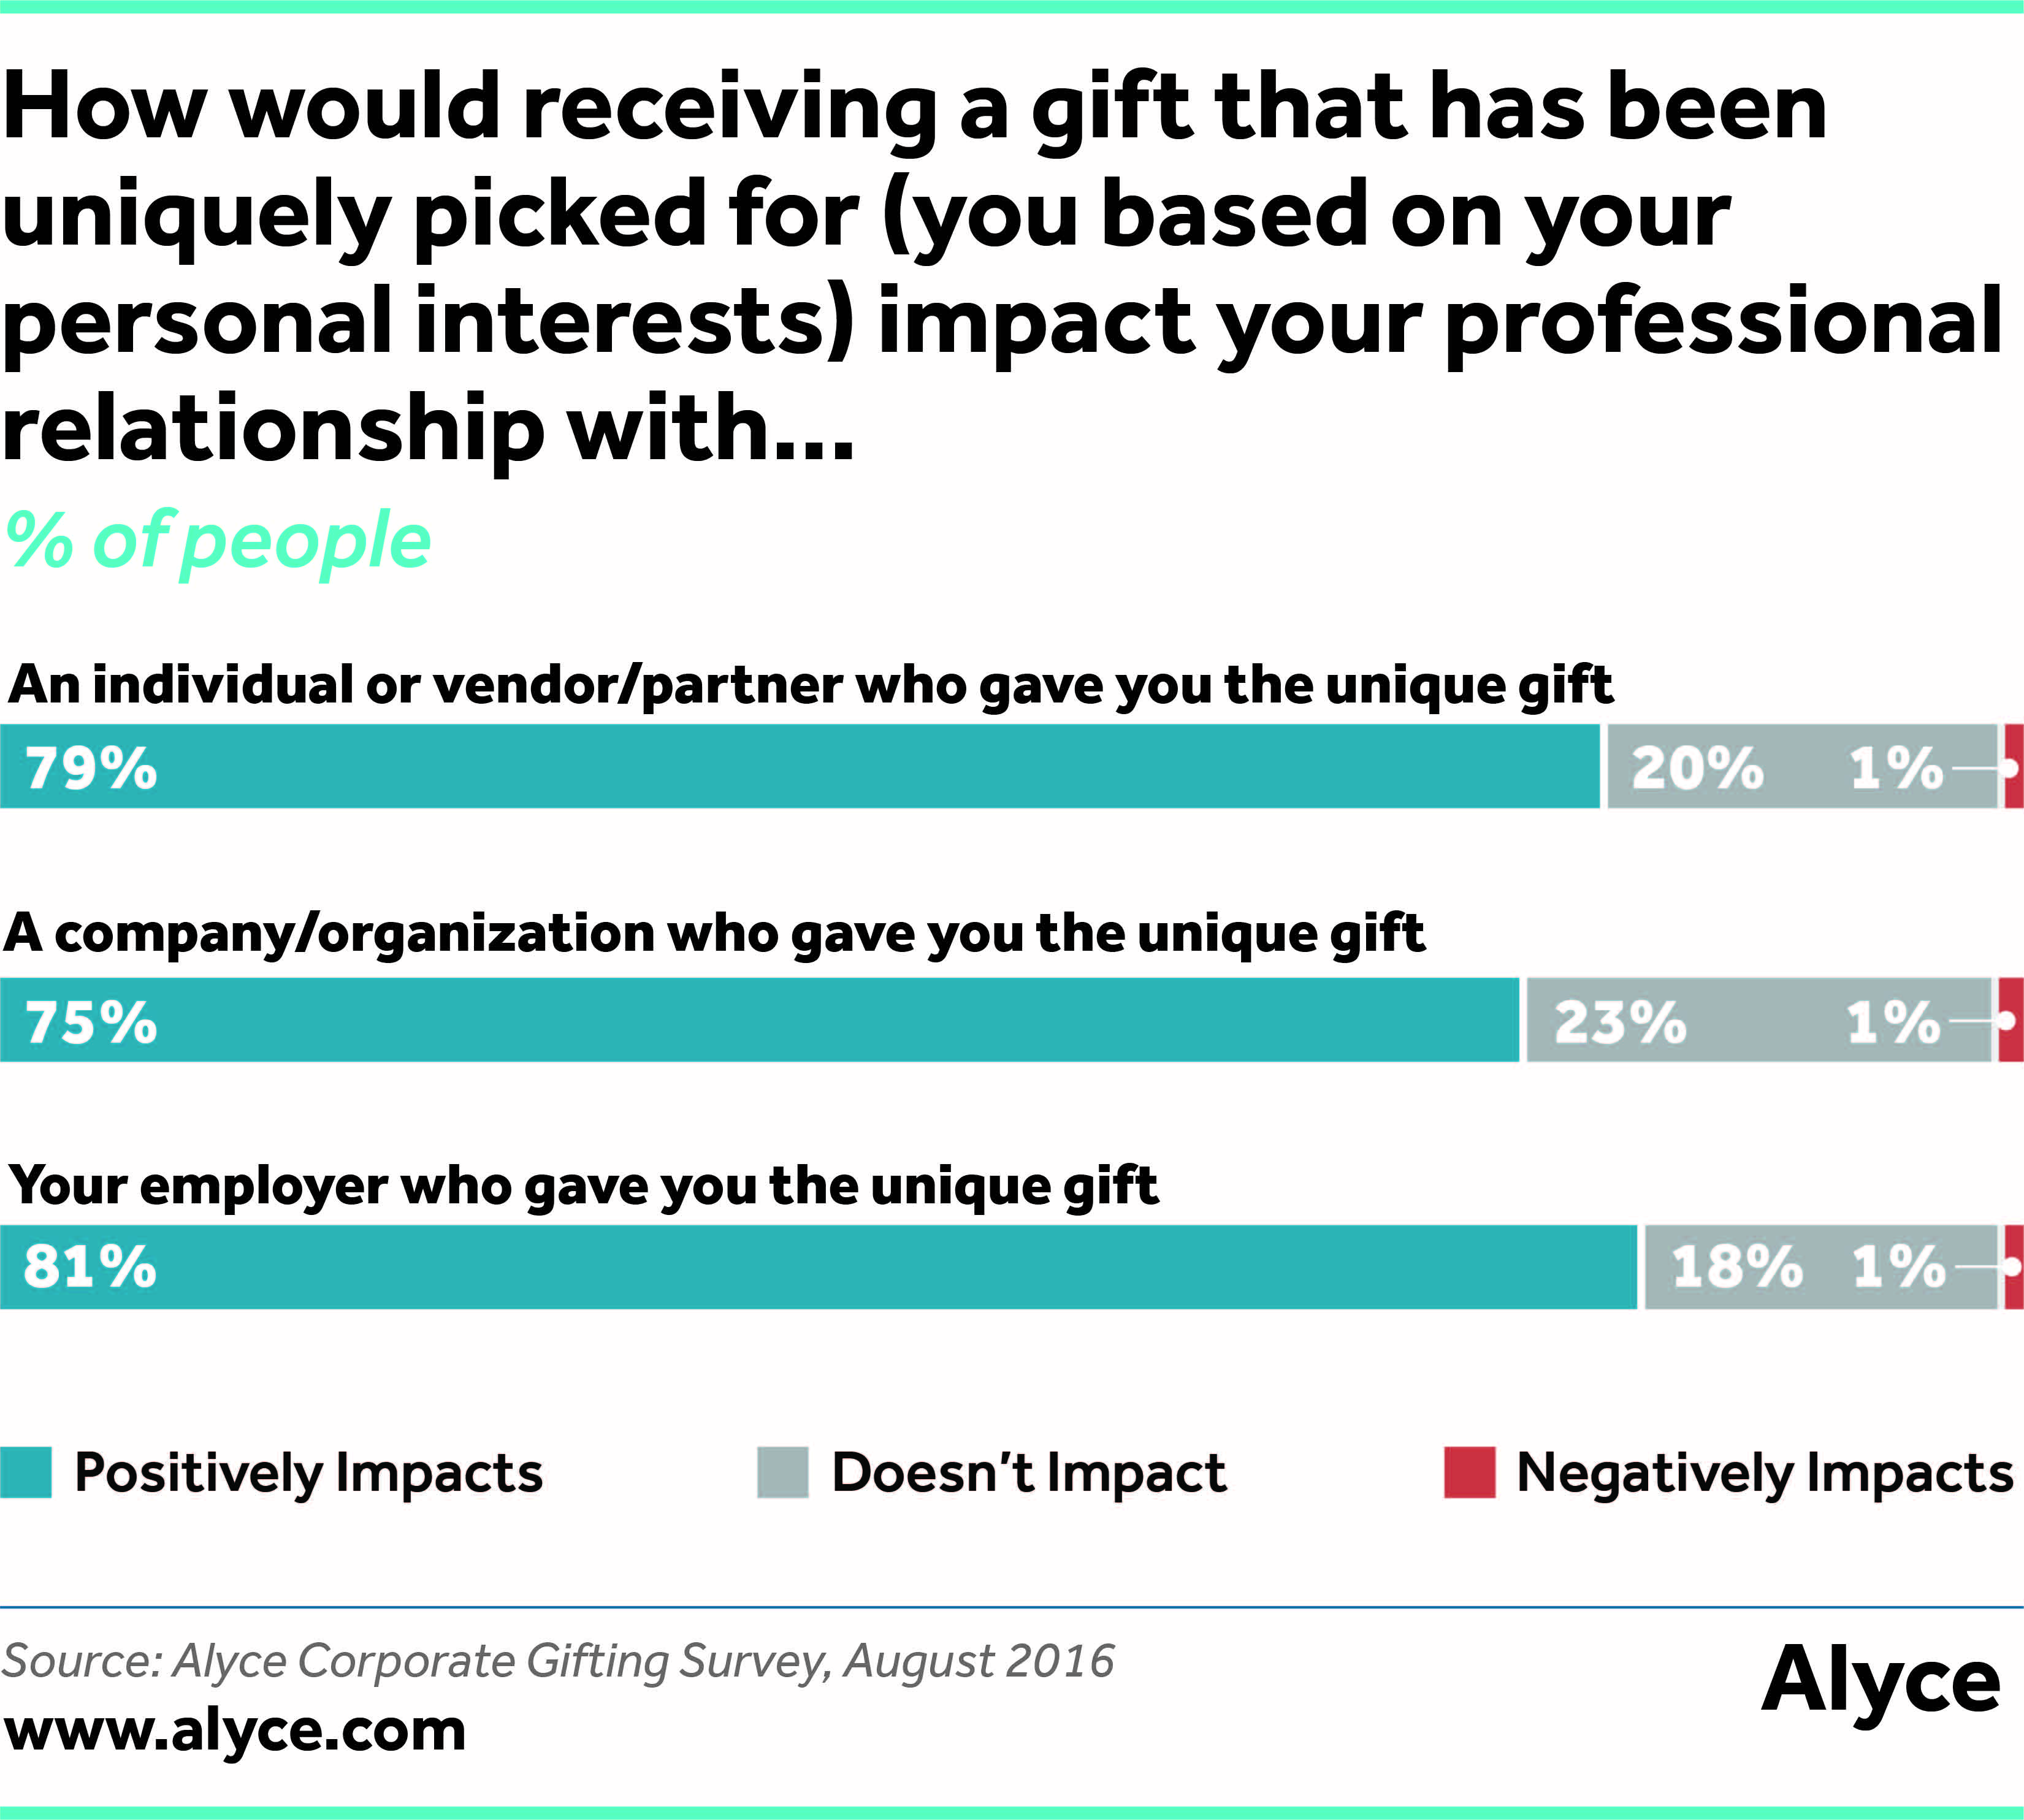 How would receiving a gift that has been uniquely picked for (you based on your personal interests) impact your professional relationship with...